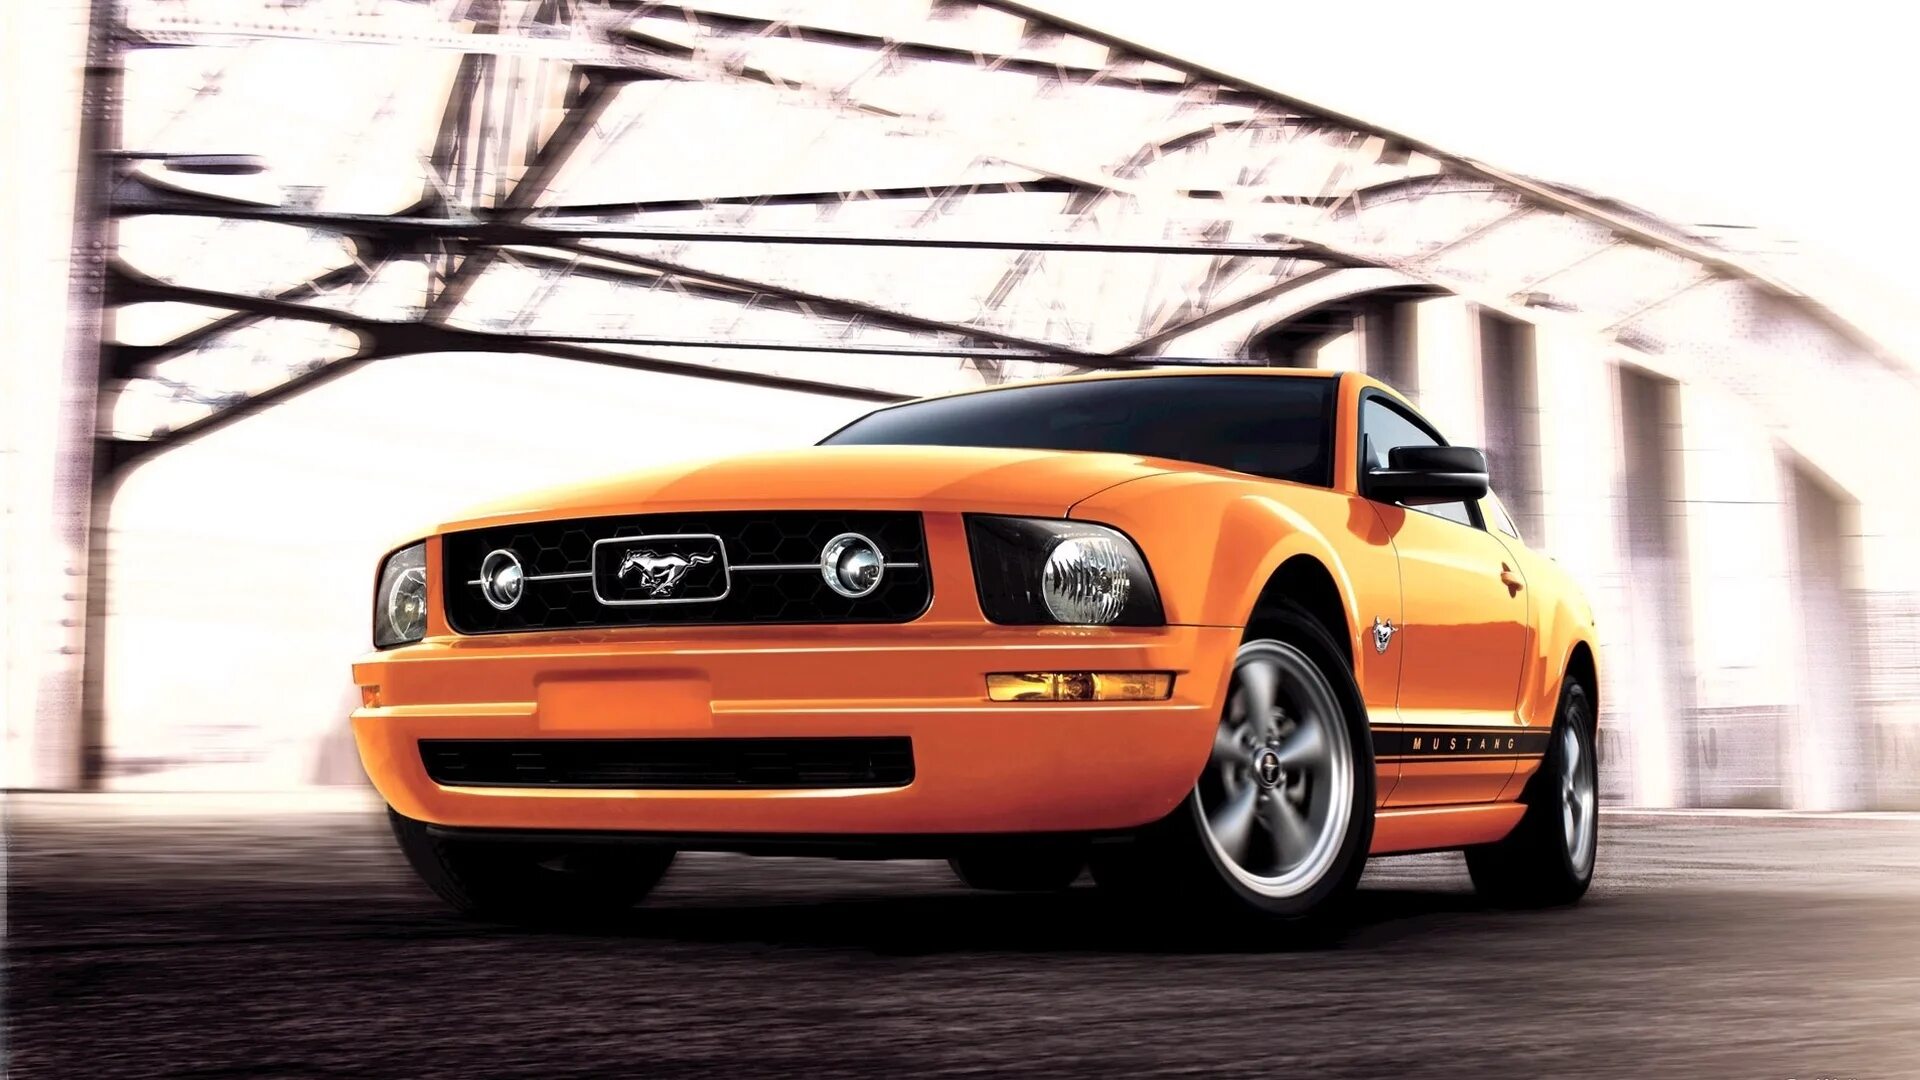 Ford Mustang 2005. Форд Мустанг 2005. Ford Mustang gt 2005 Orange. Форд Мустанг 9. Мустанг на русском языке